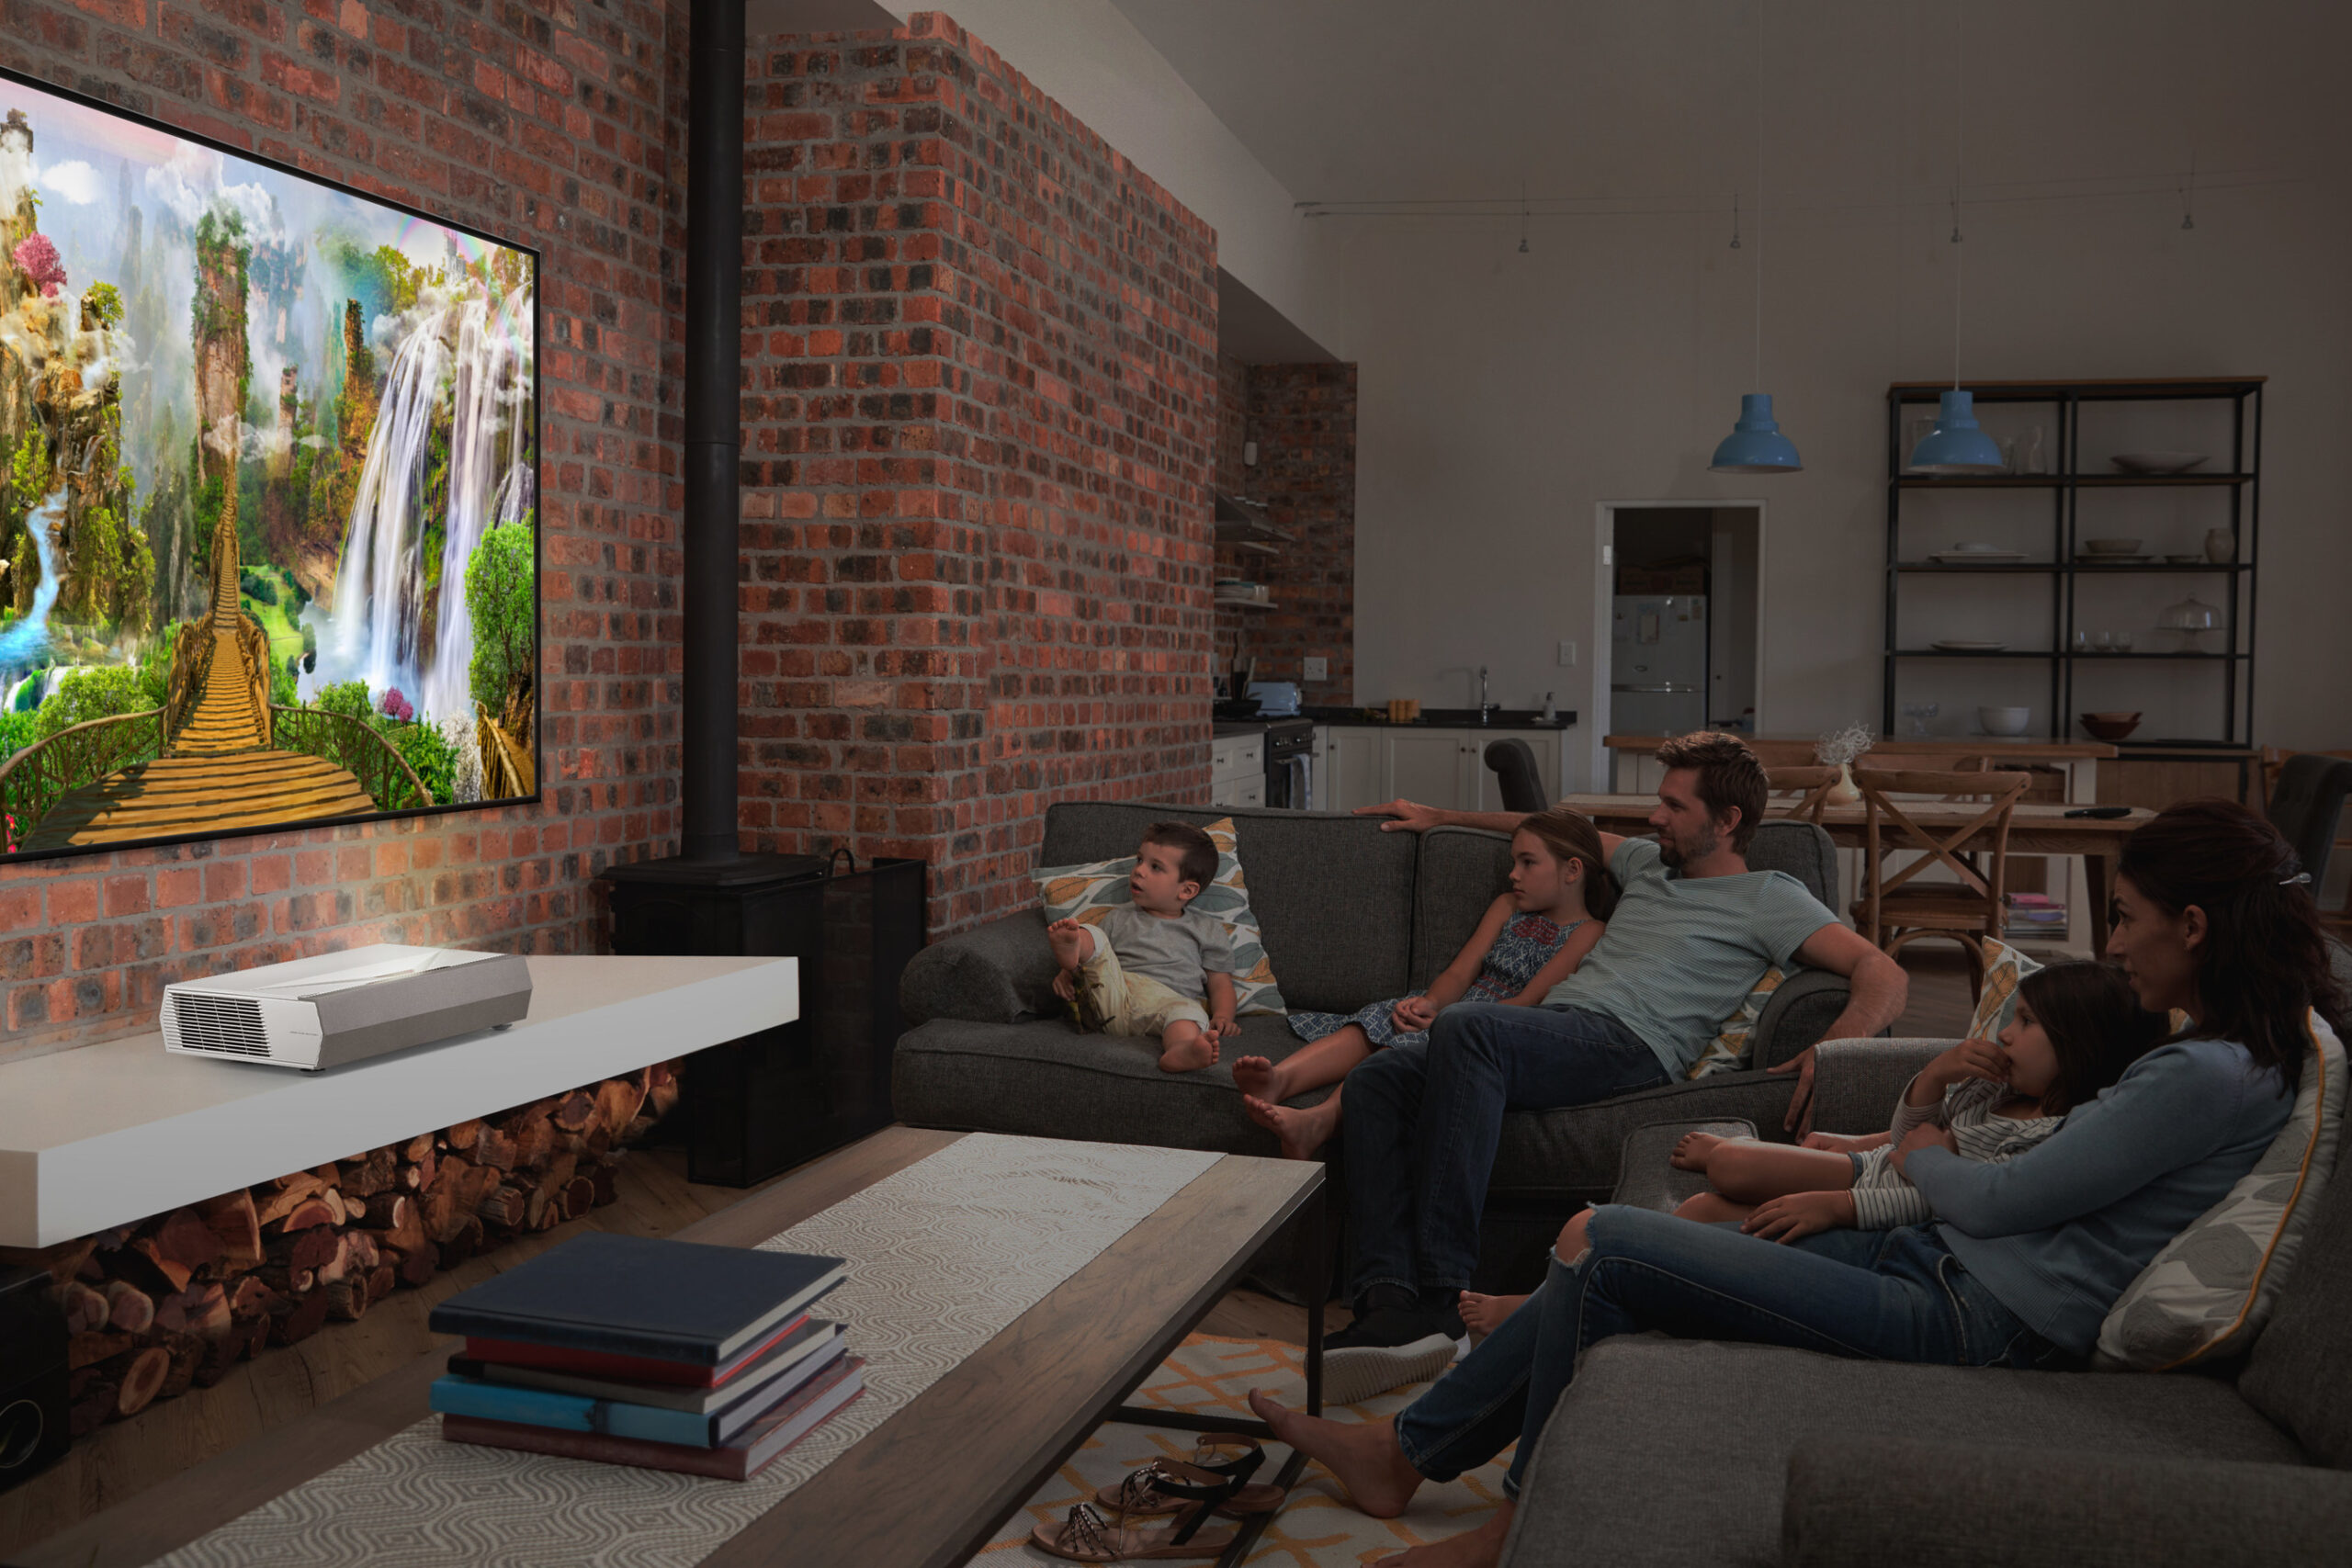 OPTOMA CinemaX Ultra Short Throw Laser Projector Series Leading the “Laser TV” Trend